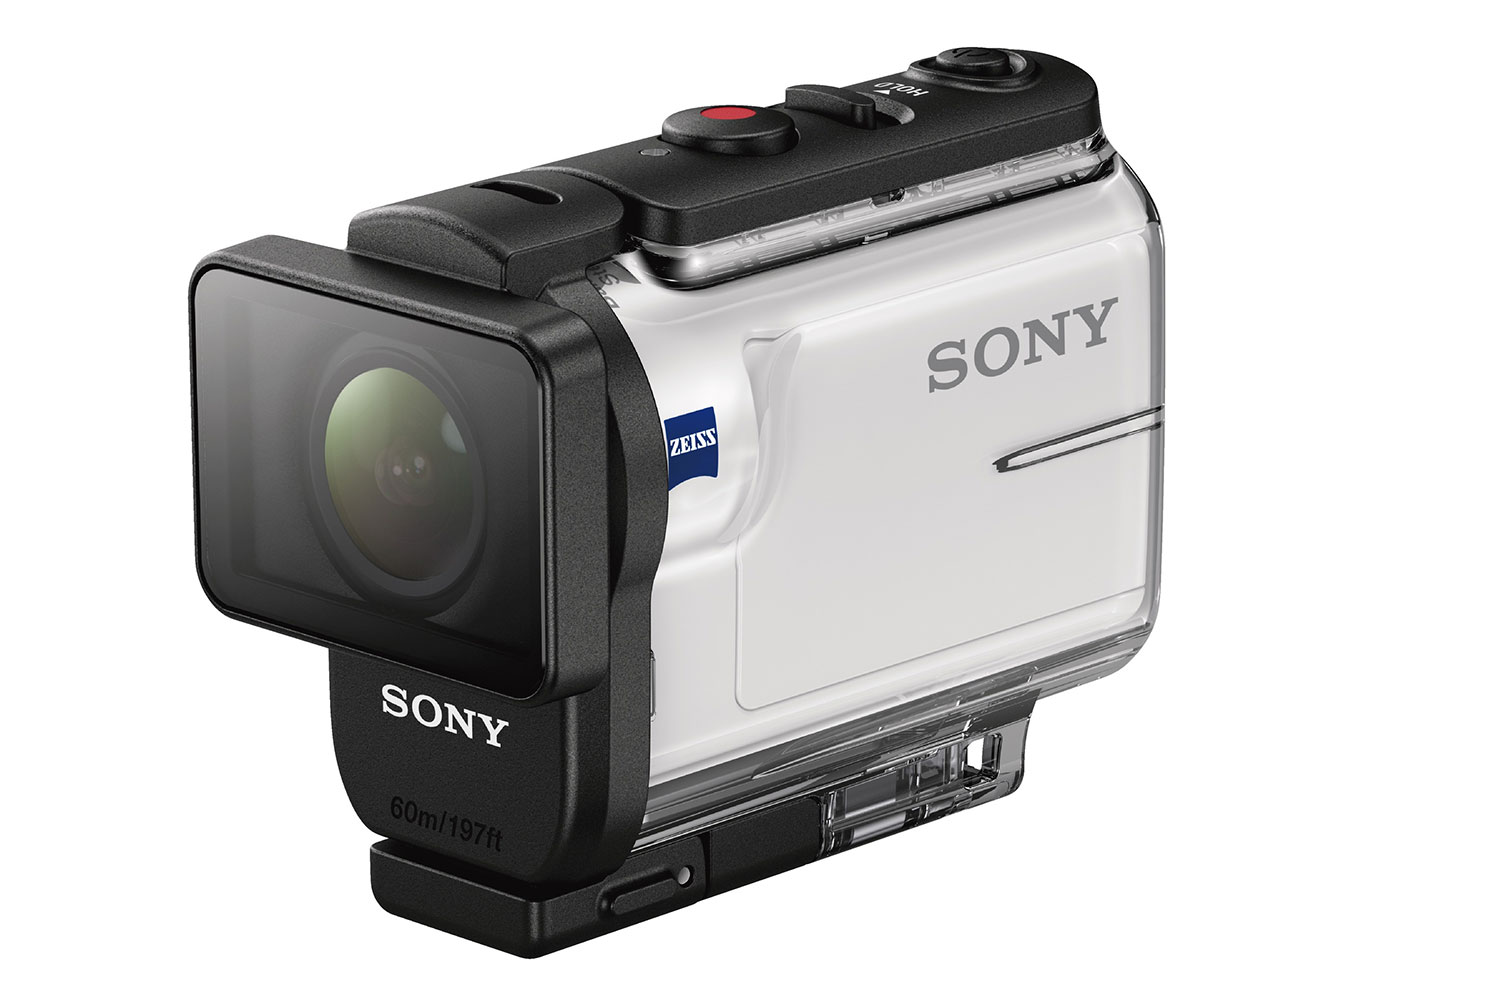 Sony HDR-AS300